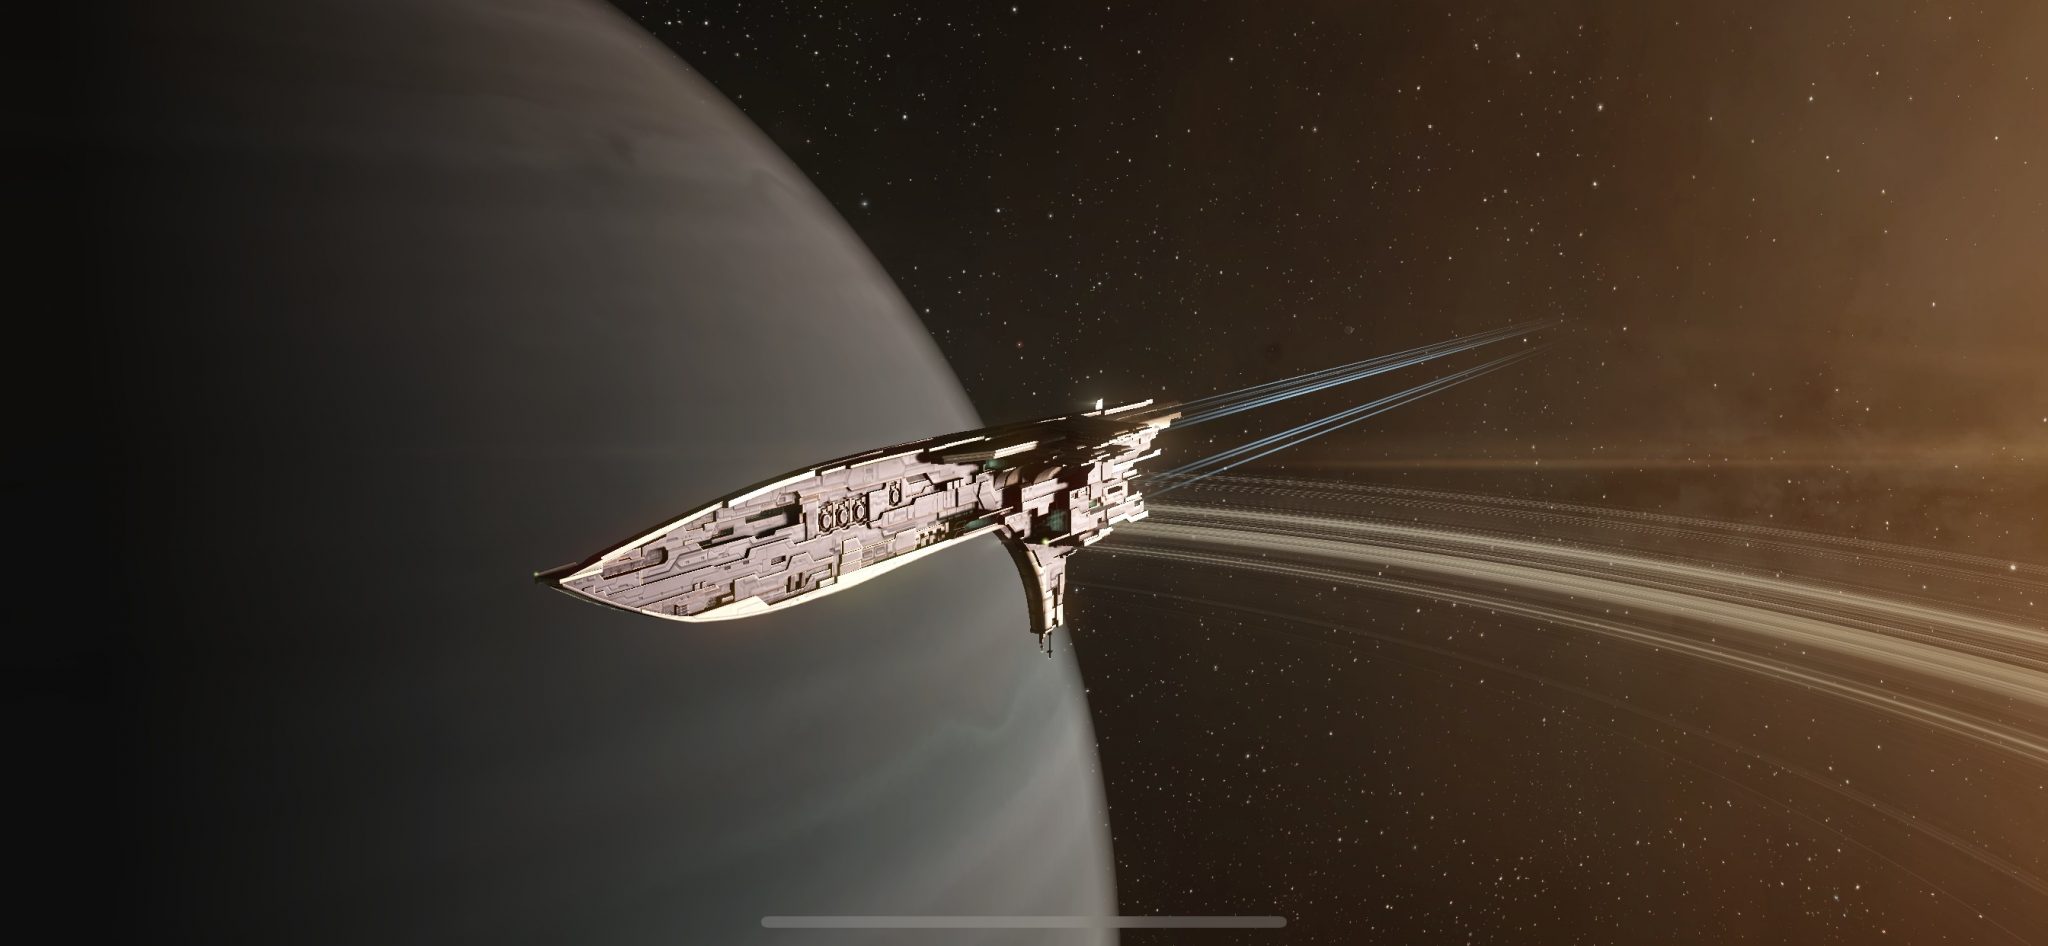 Eve echoes 14 scaled 1